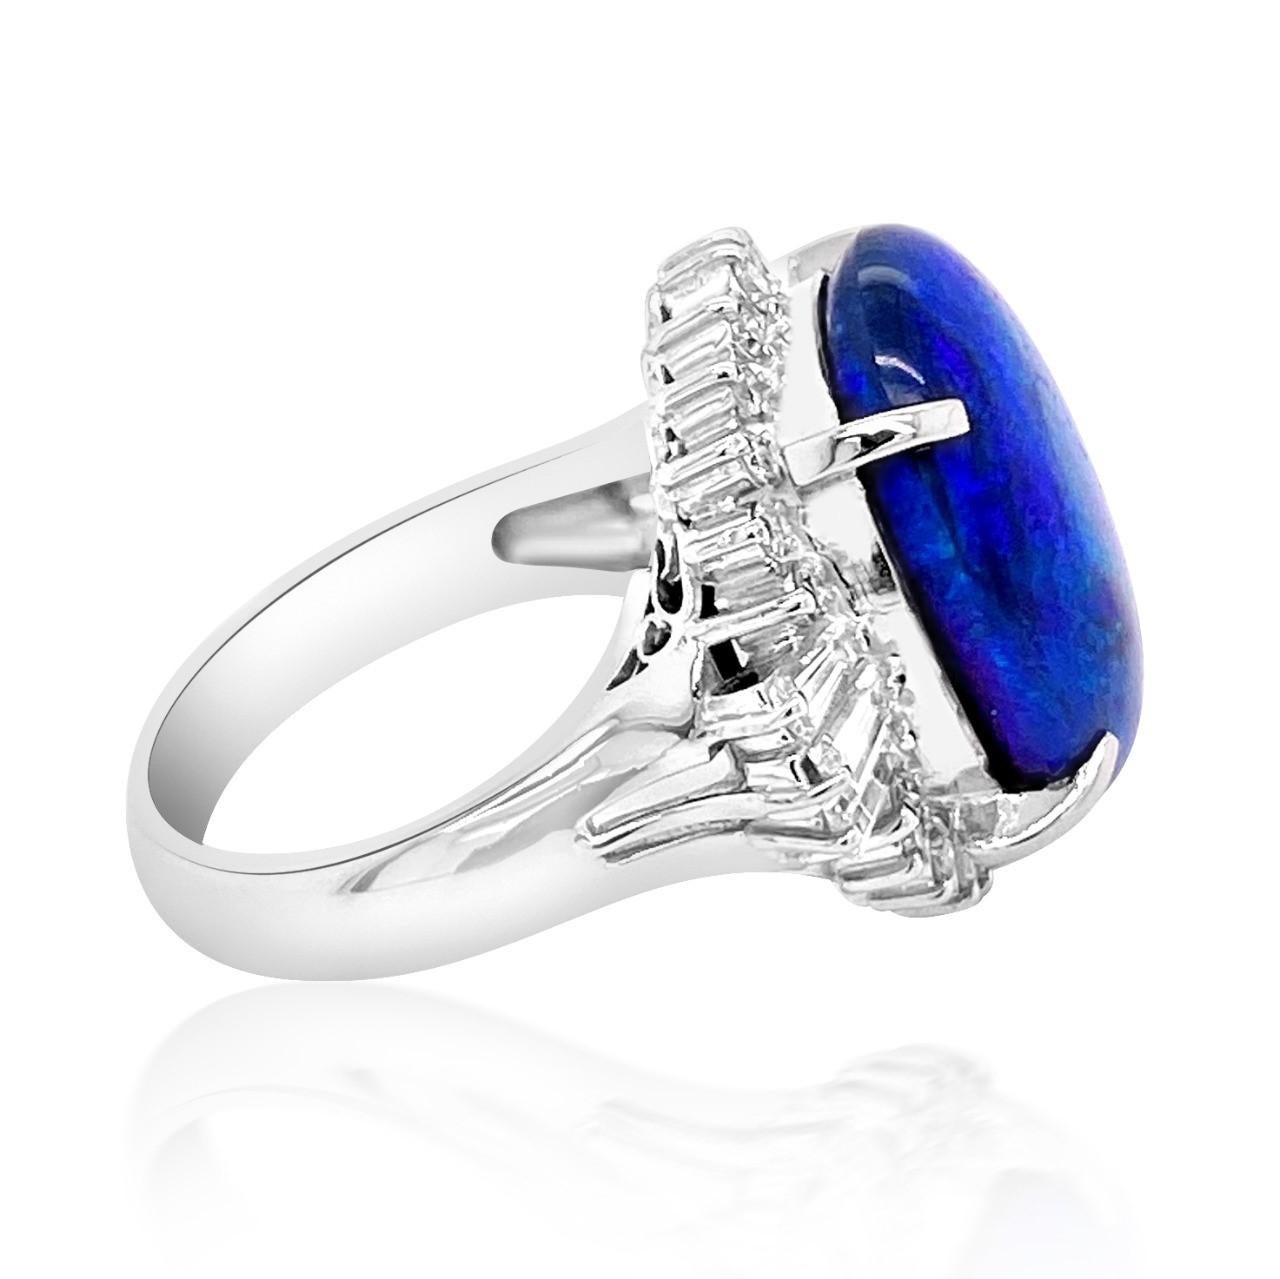 Platinum : 11.80gm 
Natural Australian Black Fire opal : 7.17ct
Natural Diamonds : 0.70ct
GIA # 2215138442
Delicately mounted in GIA Certified Platinum with 11.80gm weight, this rare natural Australian 7.17ct black fire opal has been said to be